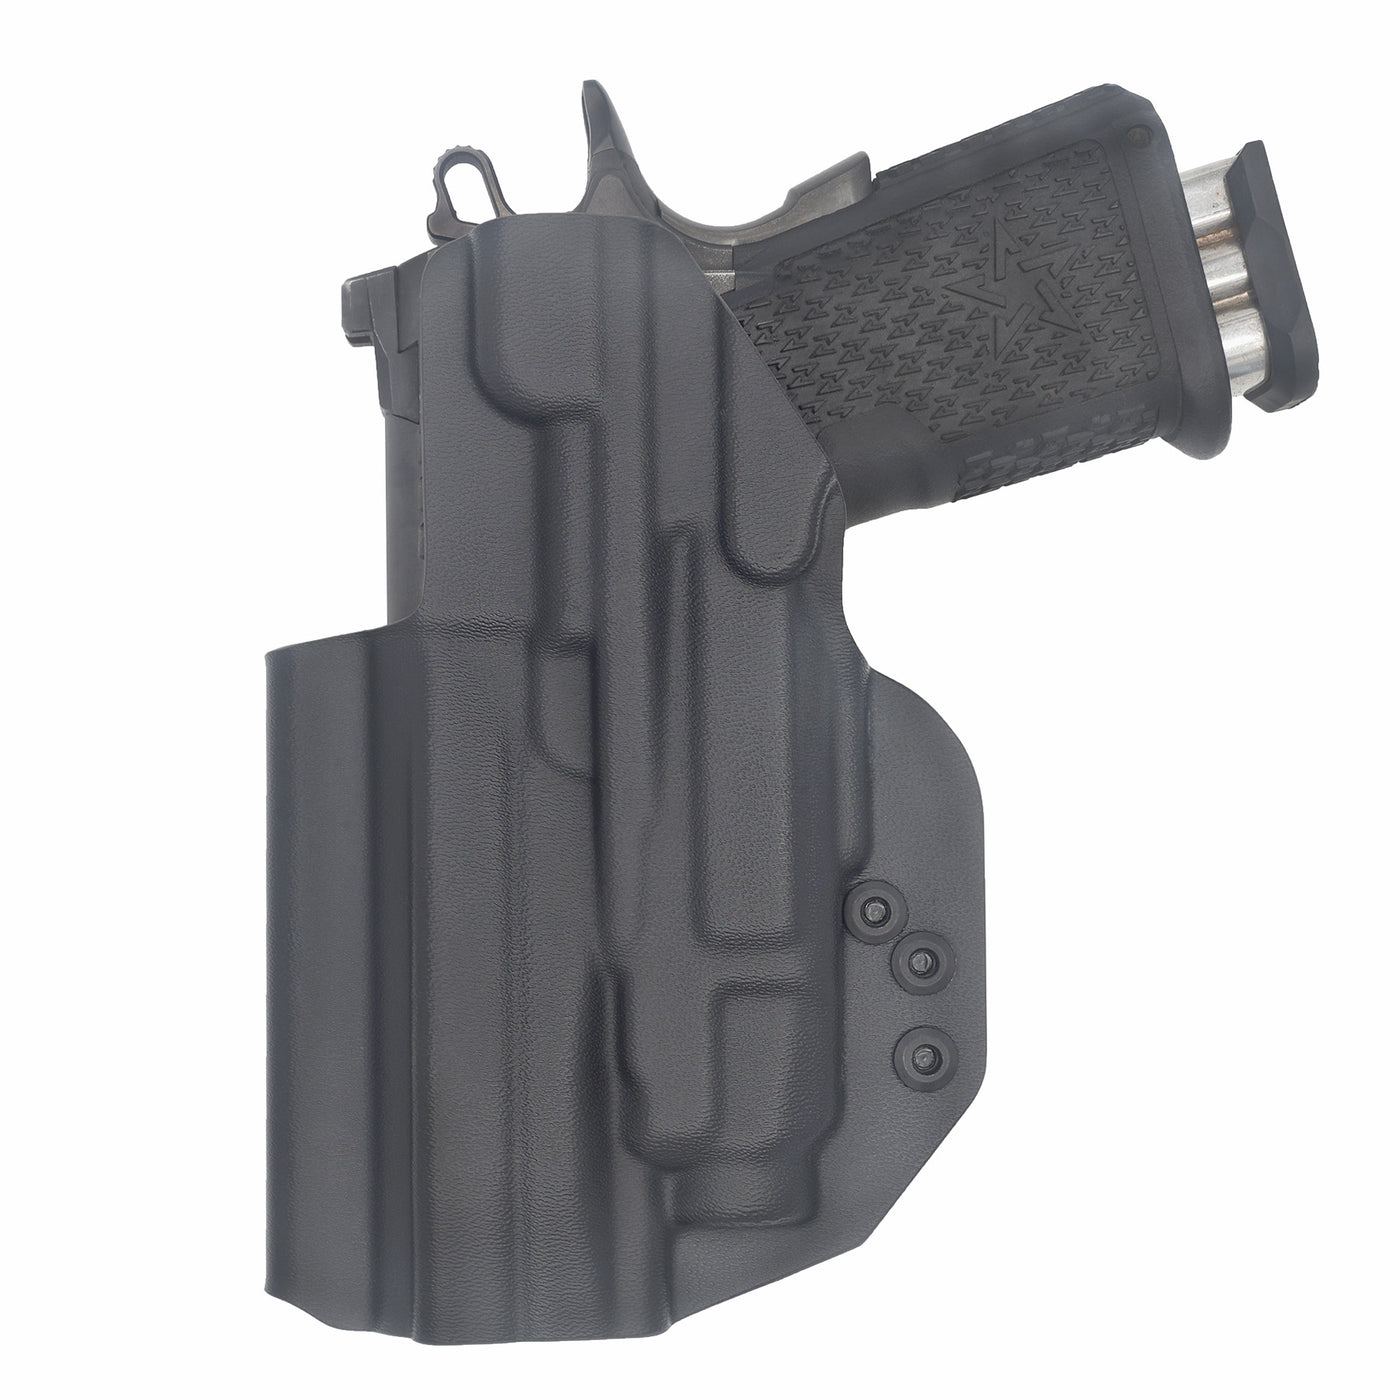 C&G Holsters custom IWB Tactical 1911 Streamlight TLR7/a in holstered position bac view